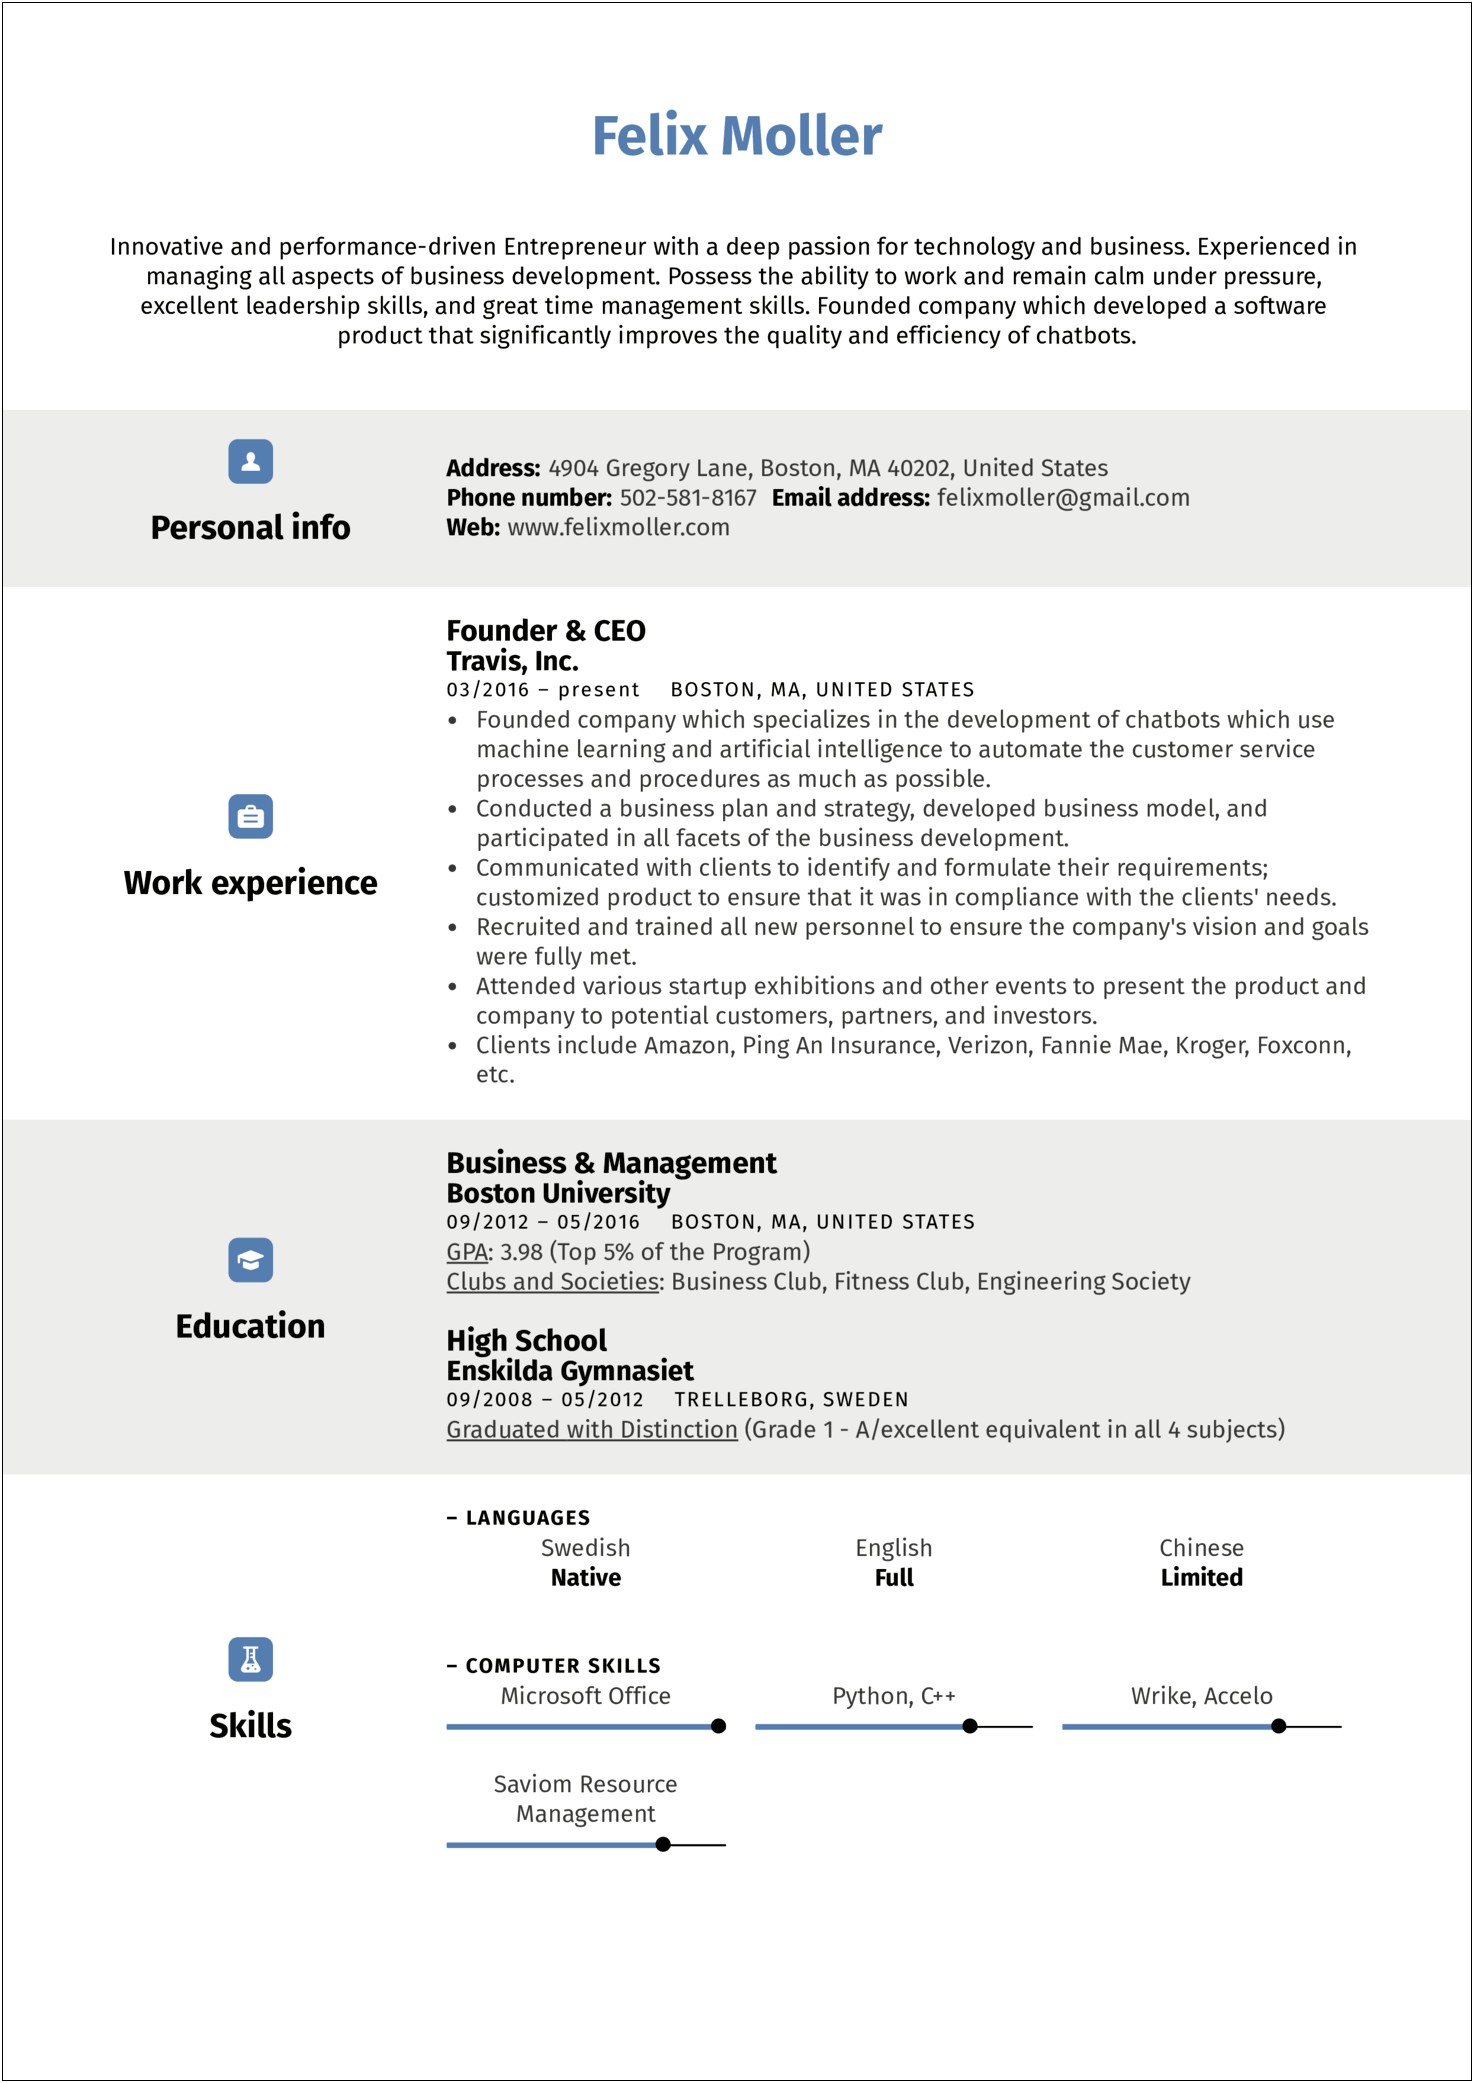 Resume Objective For Small Business Owner